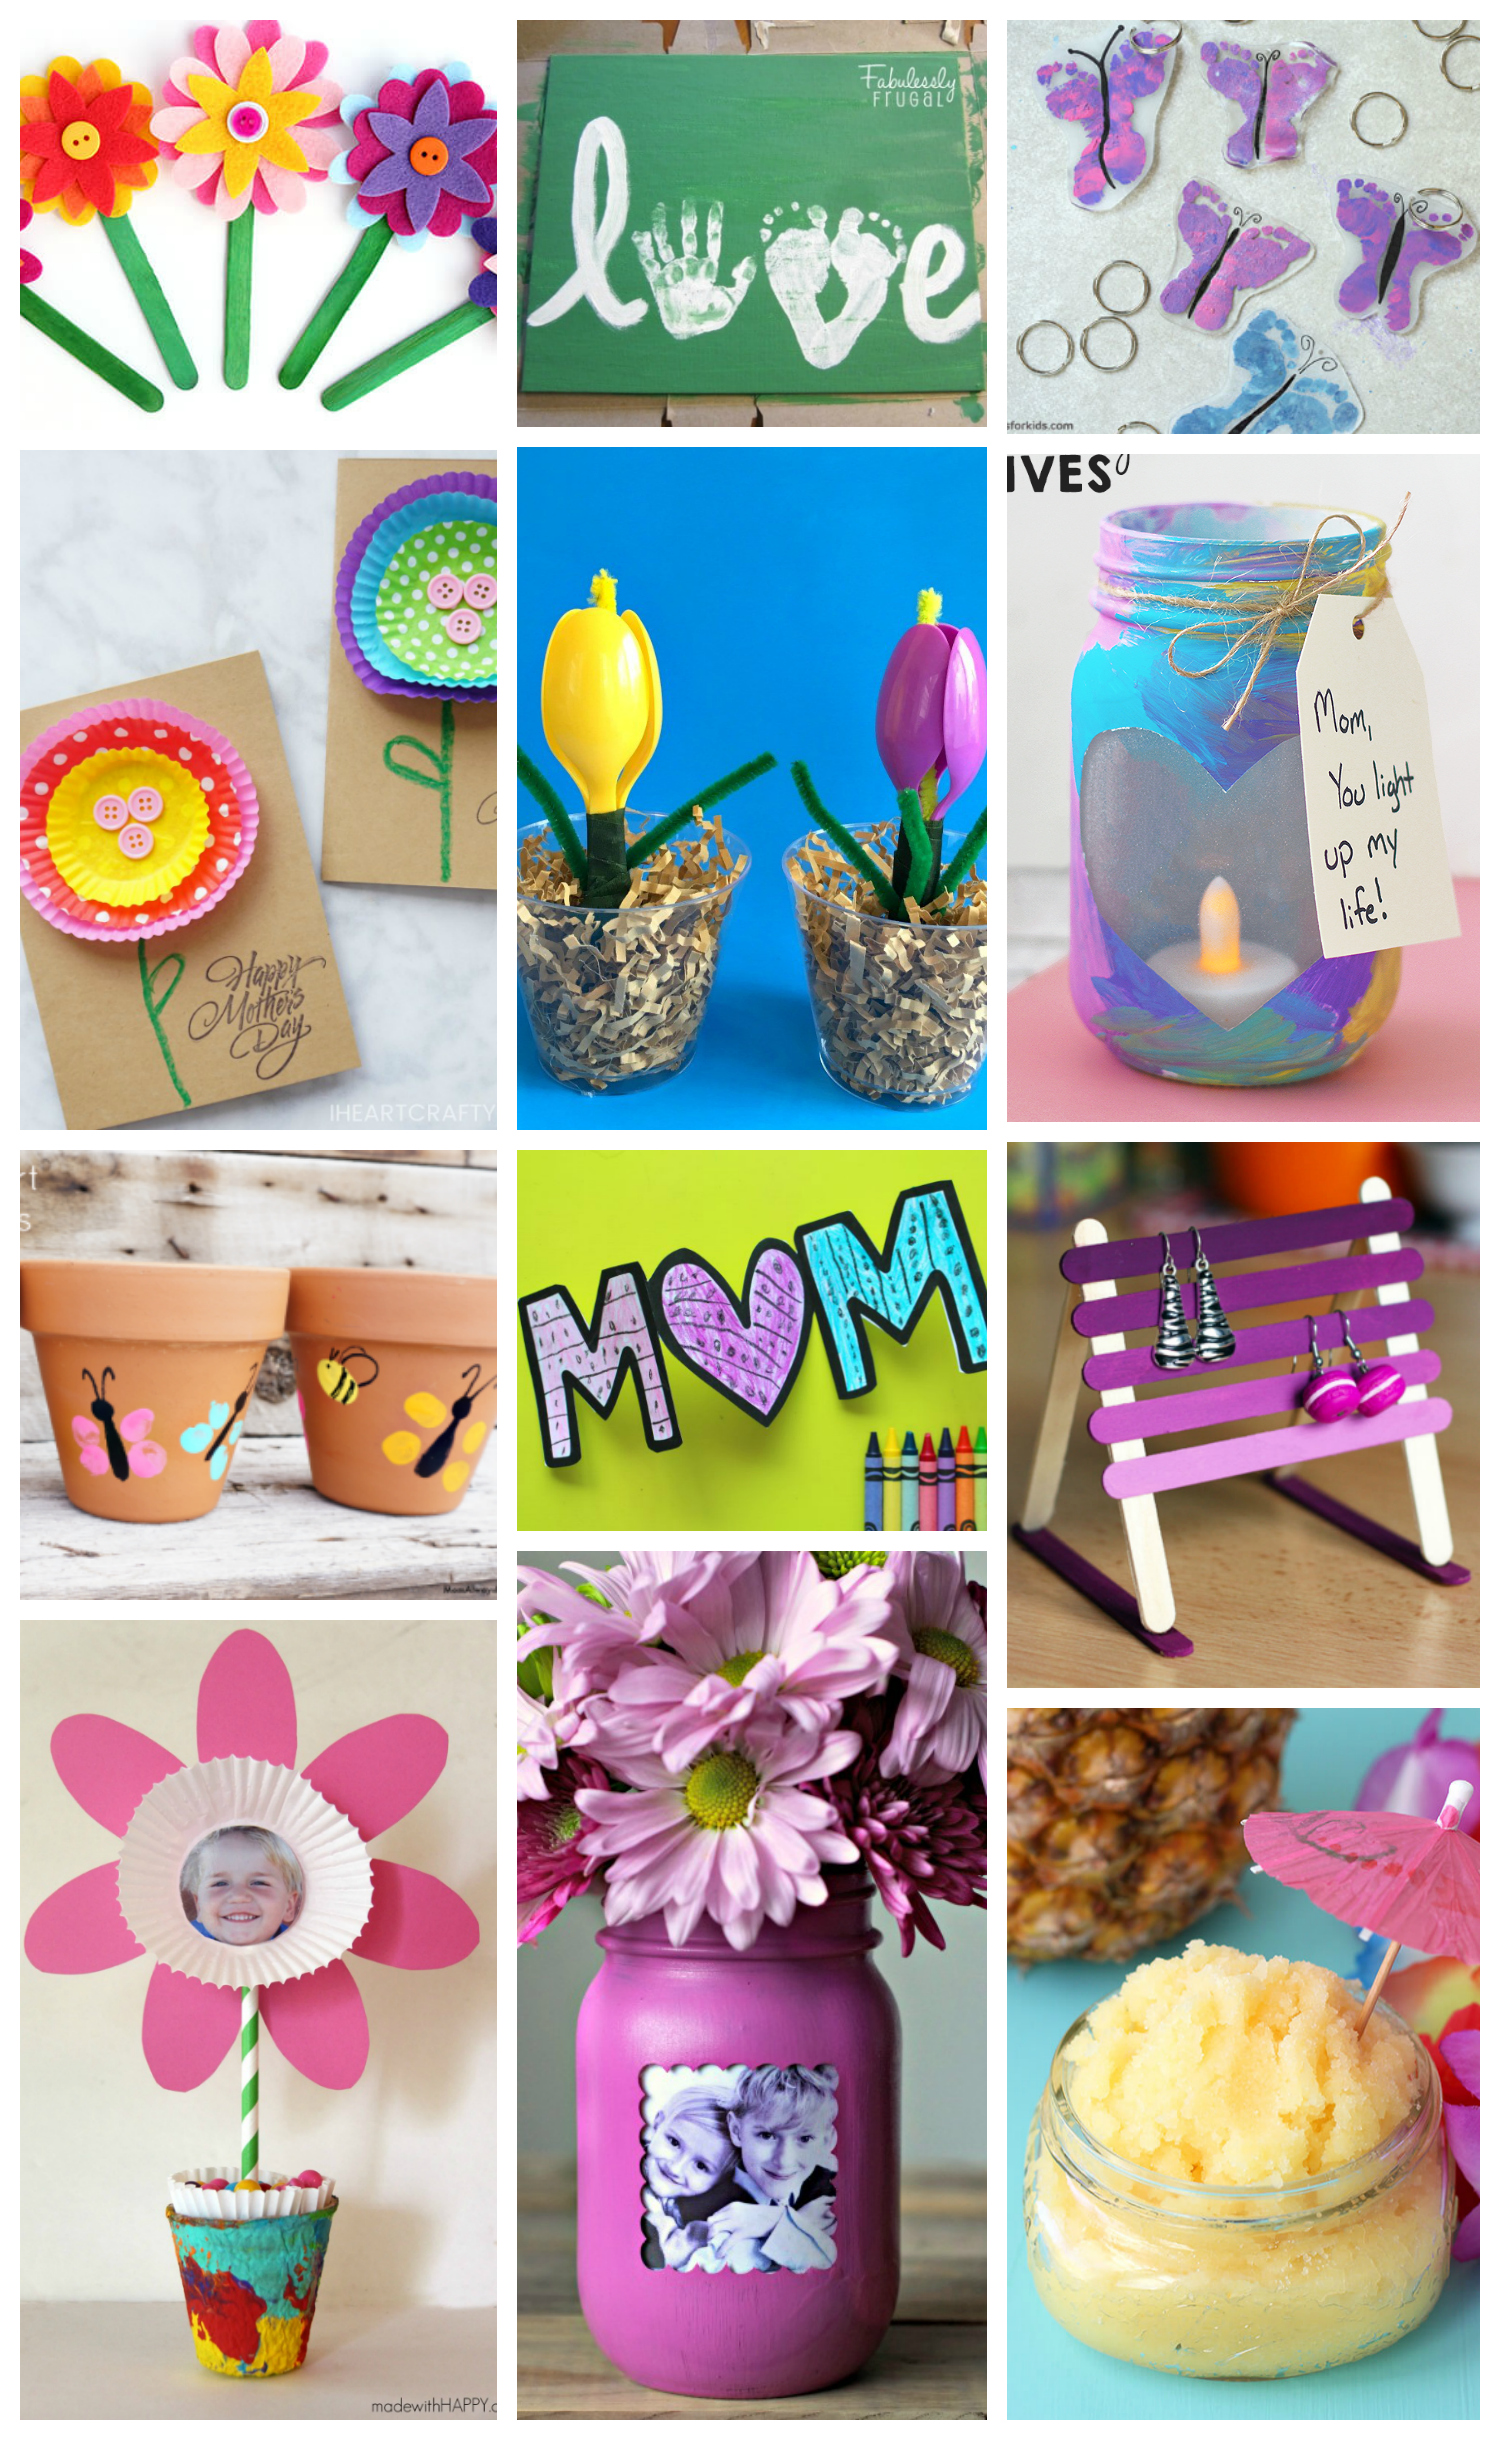 https://www.happinessishomemade.net/wp-content/uploads/2018/04/Mothers-Day-Crafts-for-Kids.jpg